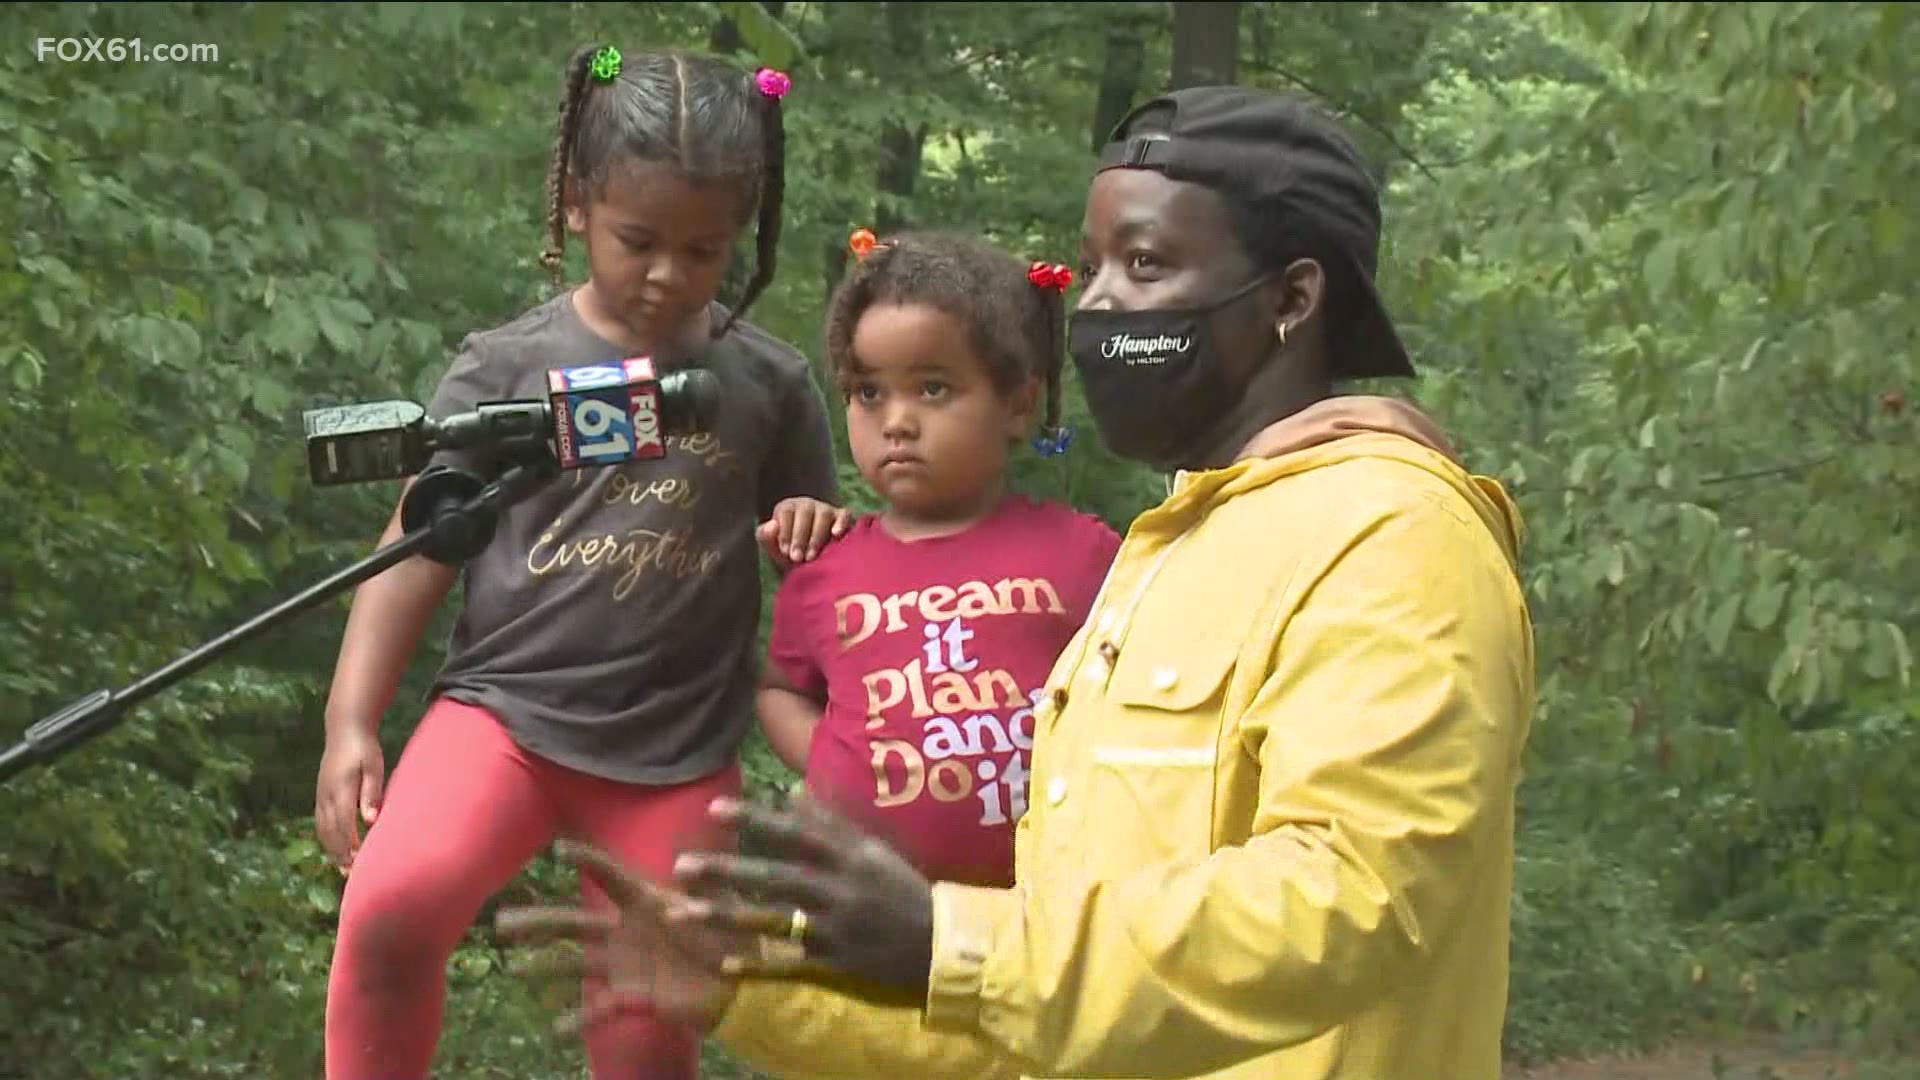 FOX61's Keith McGilvery caught up with a father and his two girls who enjoyed Penwood State Park in the rain Thursday morning.